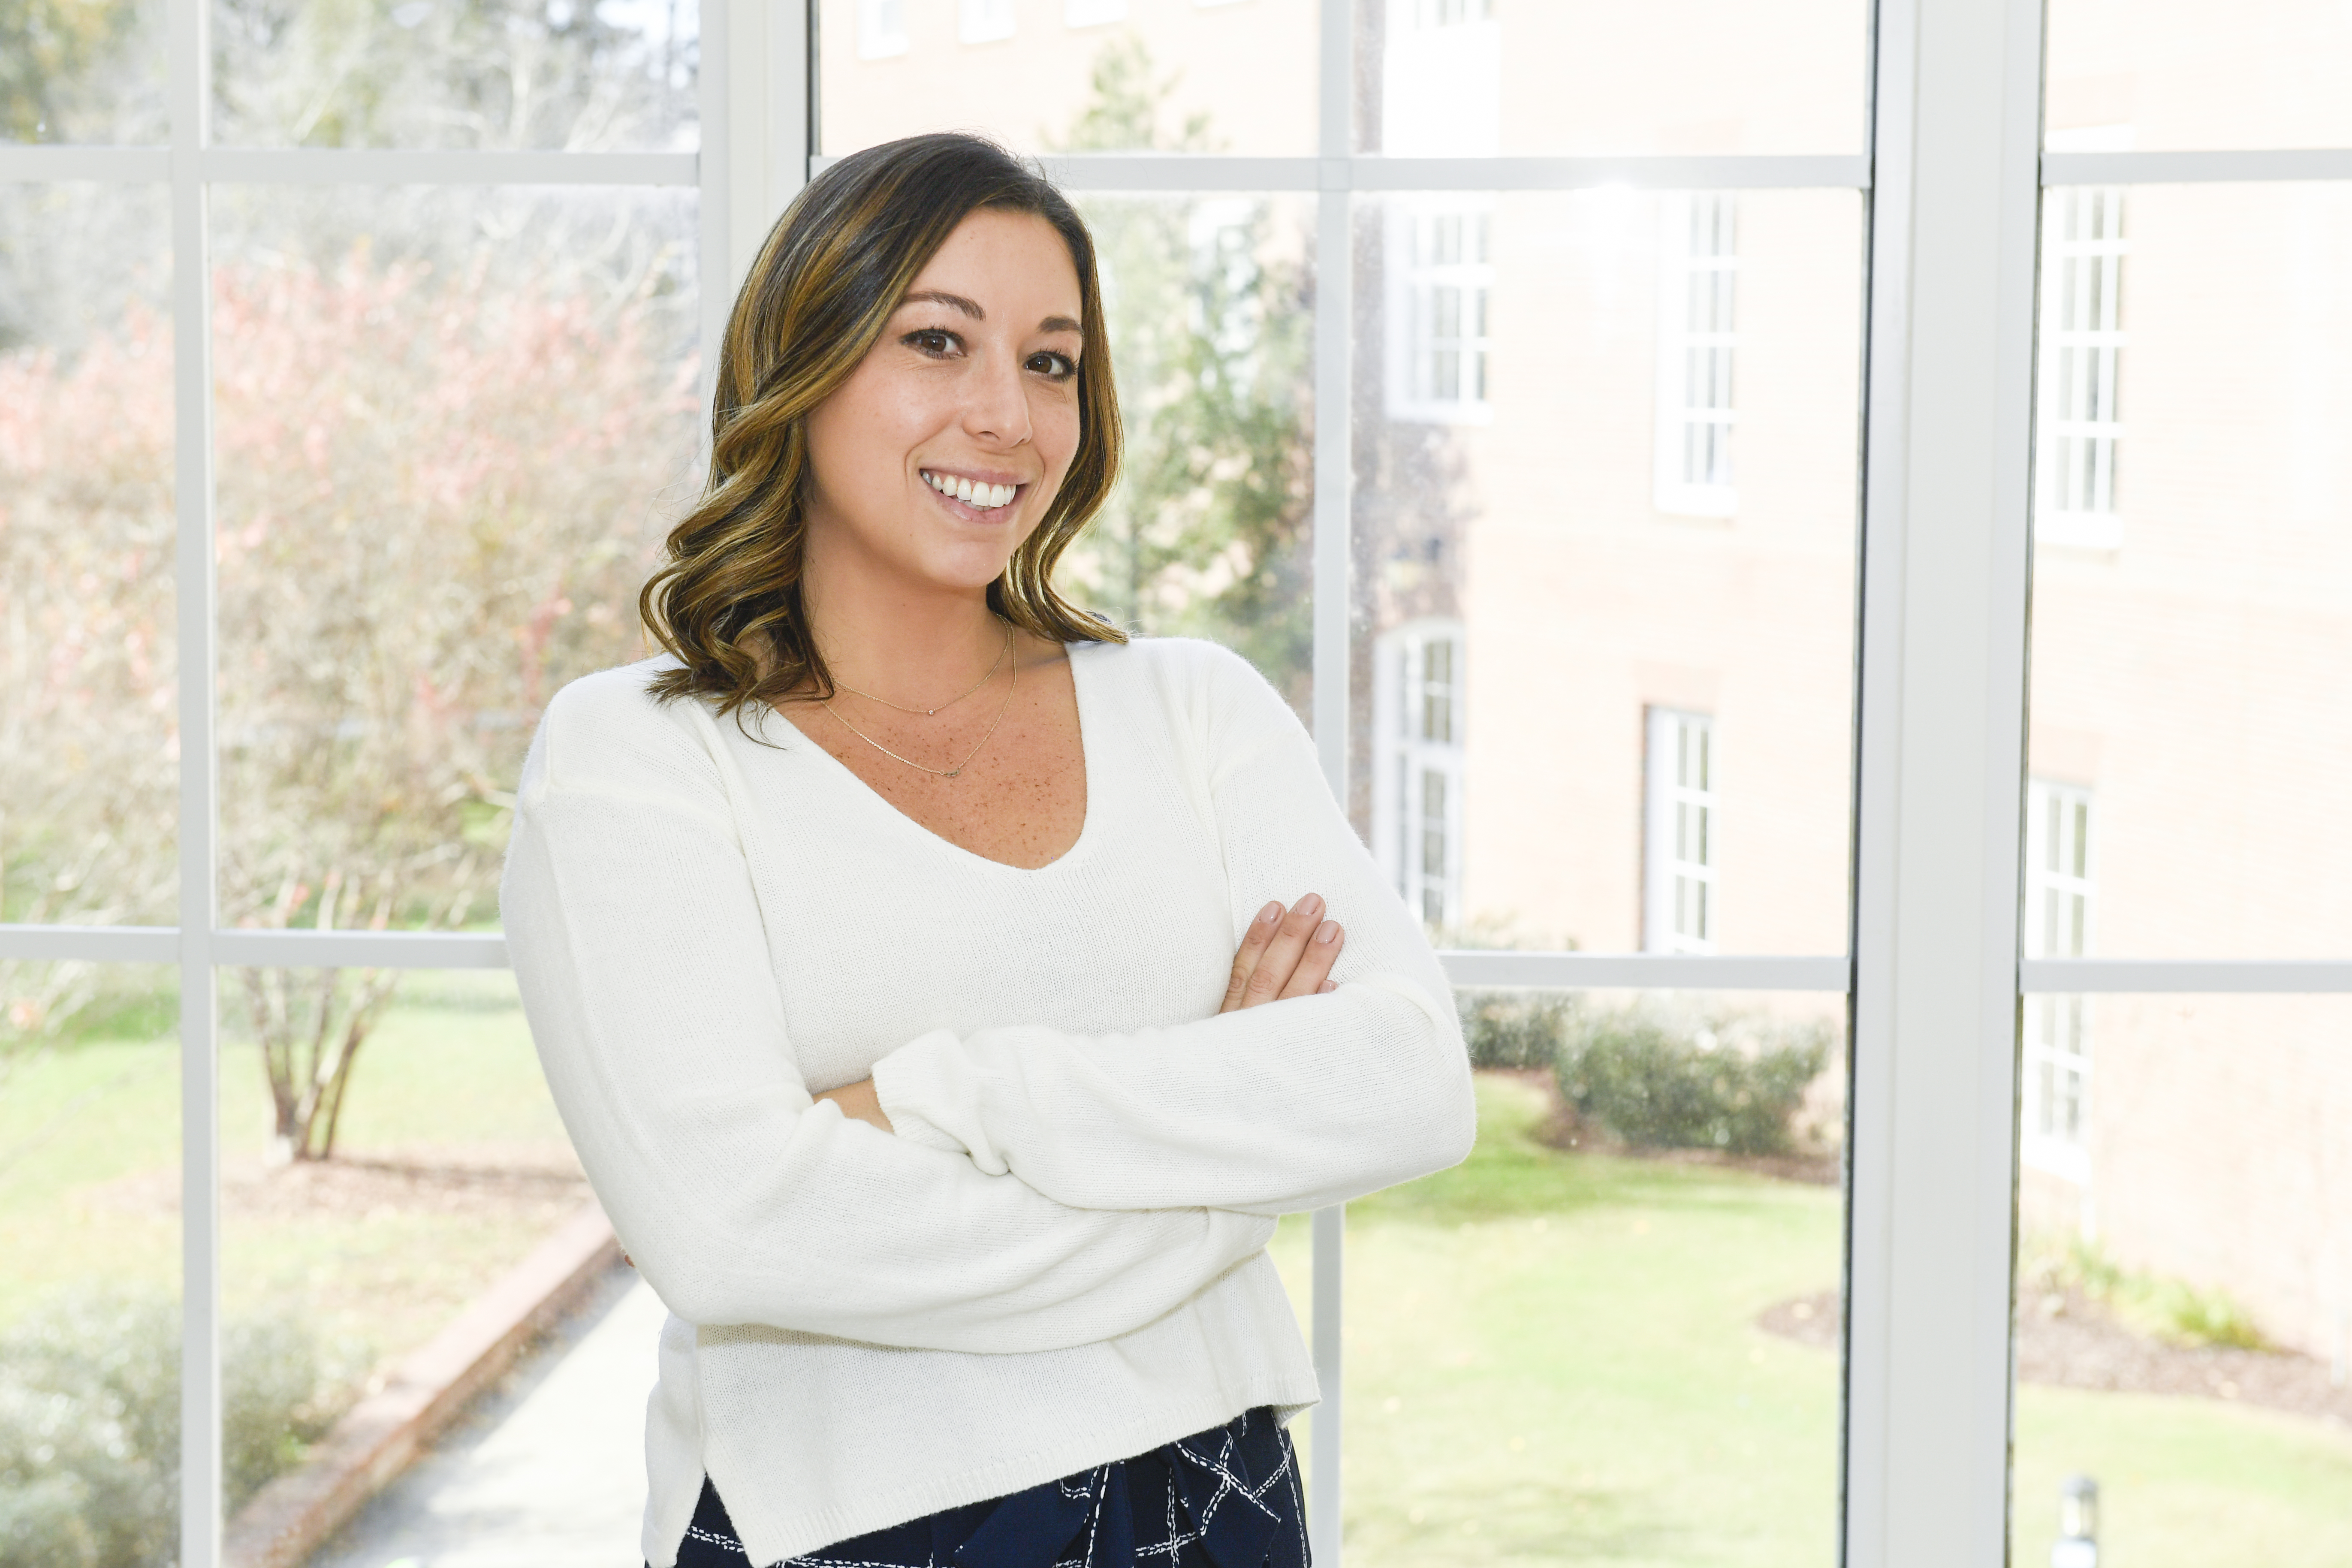 Image of alumna Michelle Russo in front of a window on Coastal Carolina University's campus